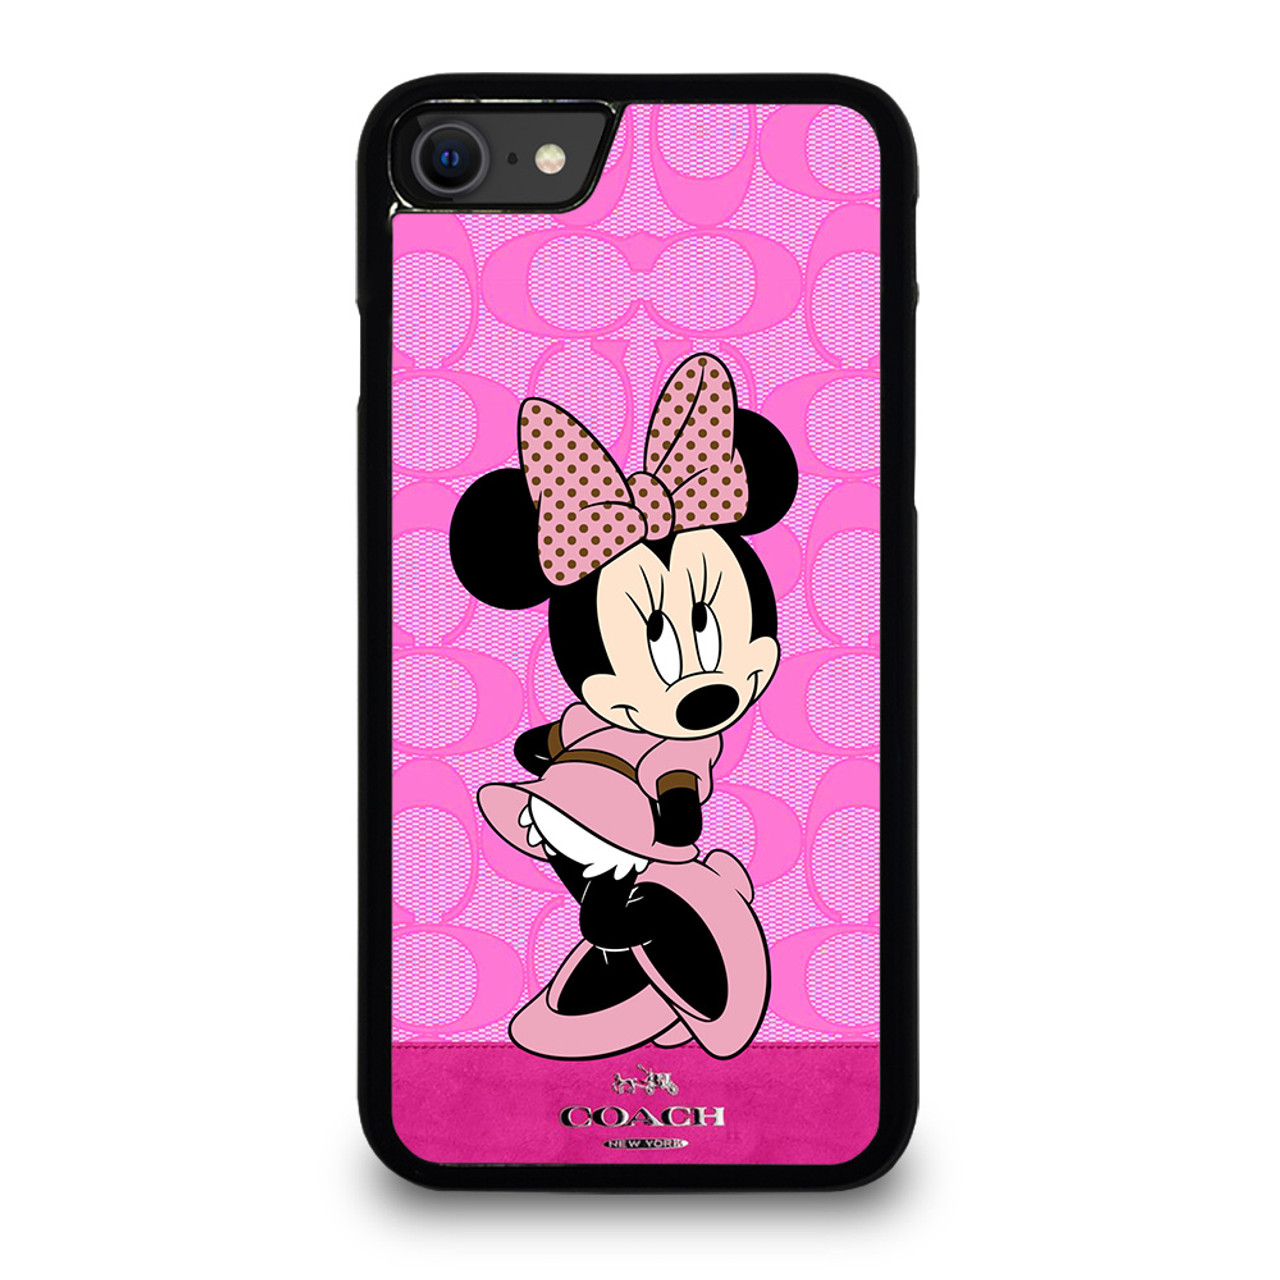 COACH NEW YORK LOGO MINNIE MOUSE DISNEY iPhone 2020 Case Cover